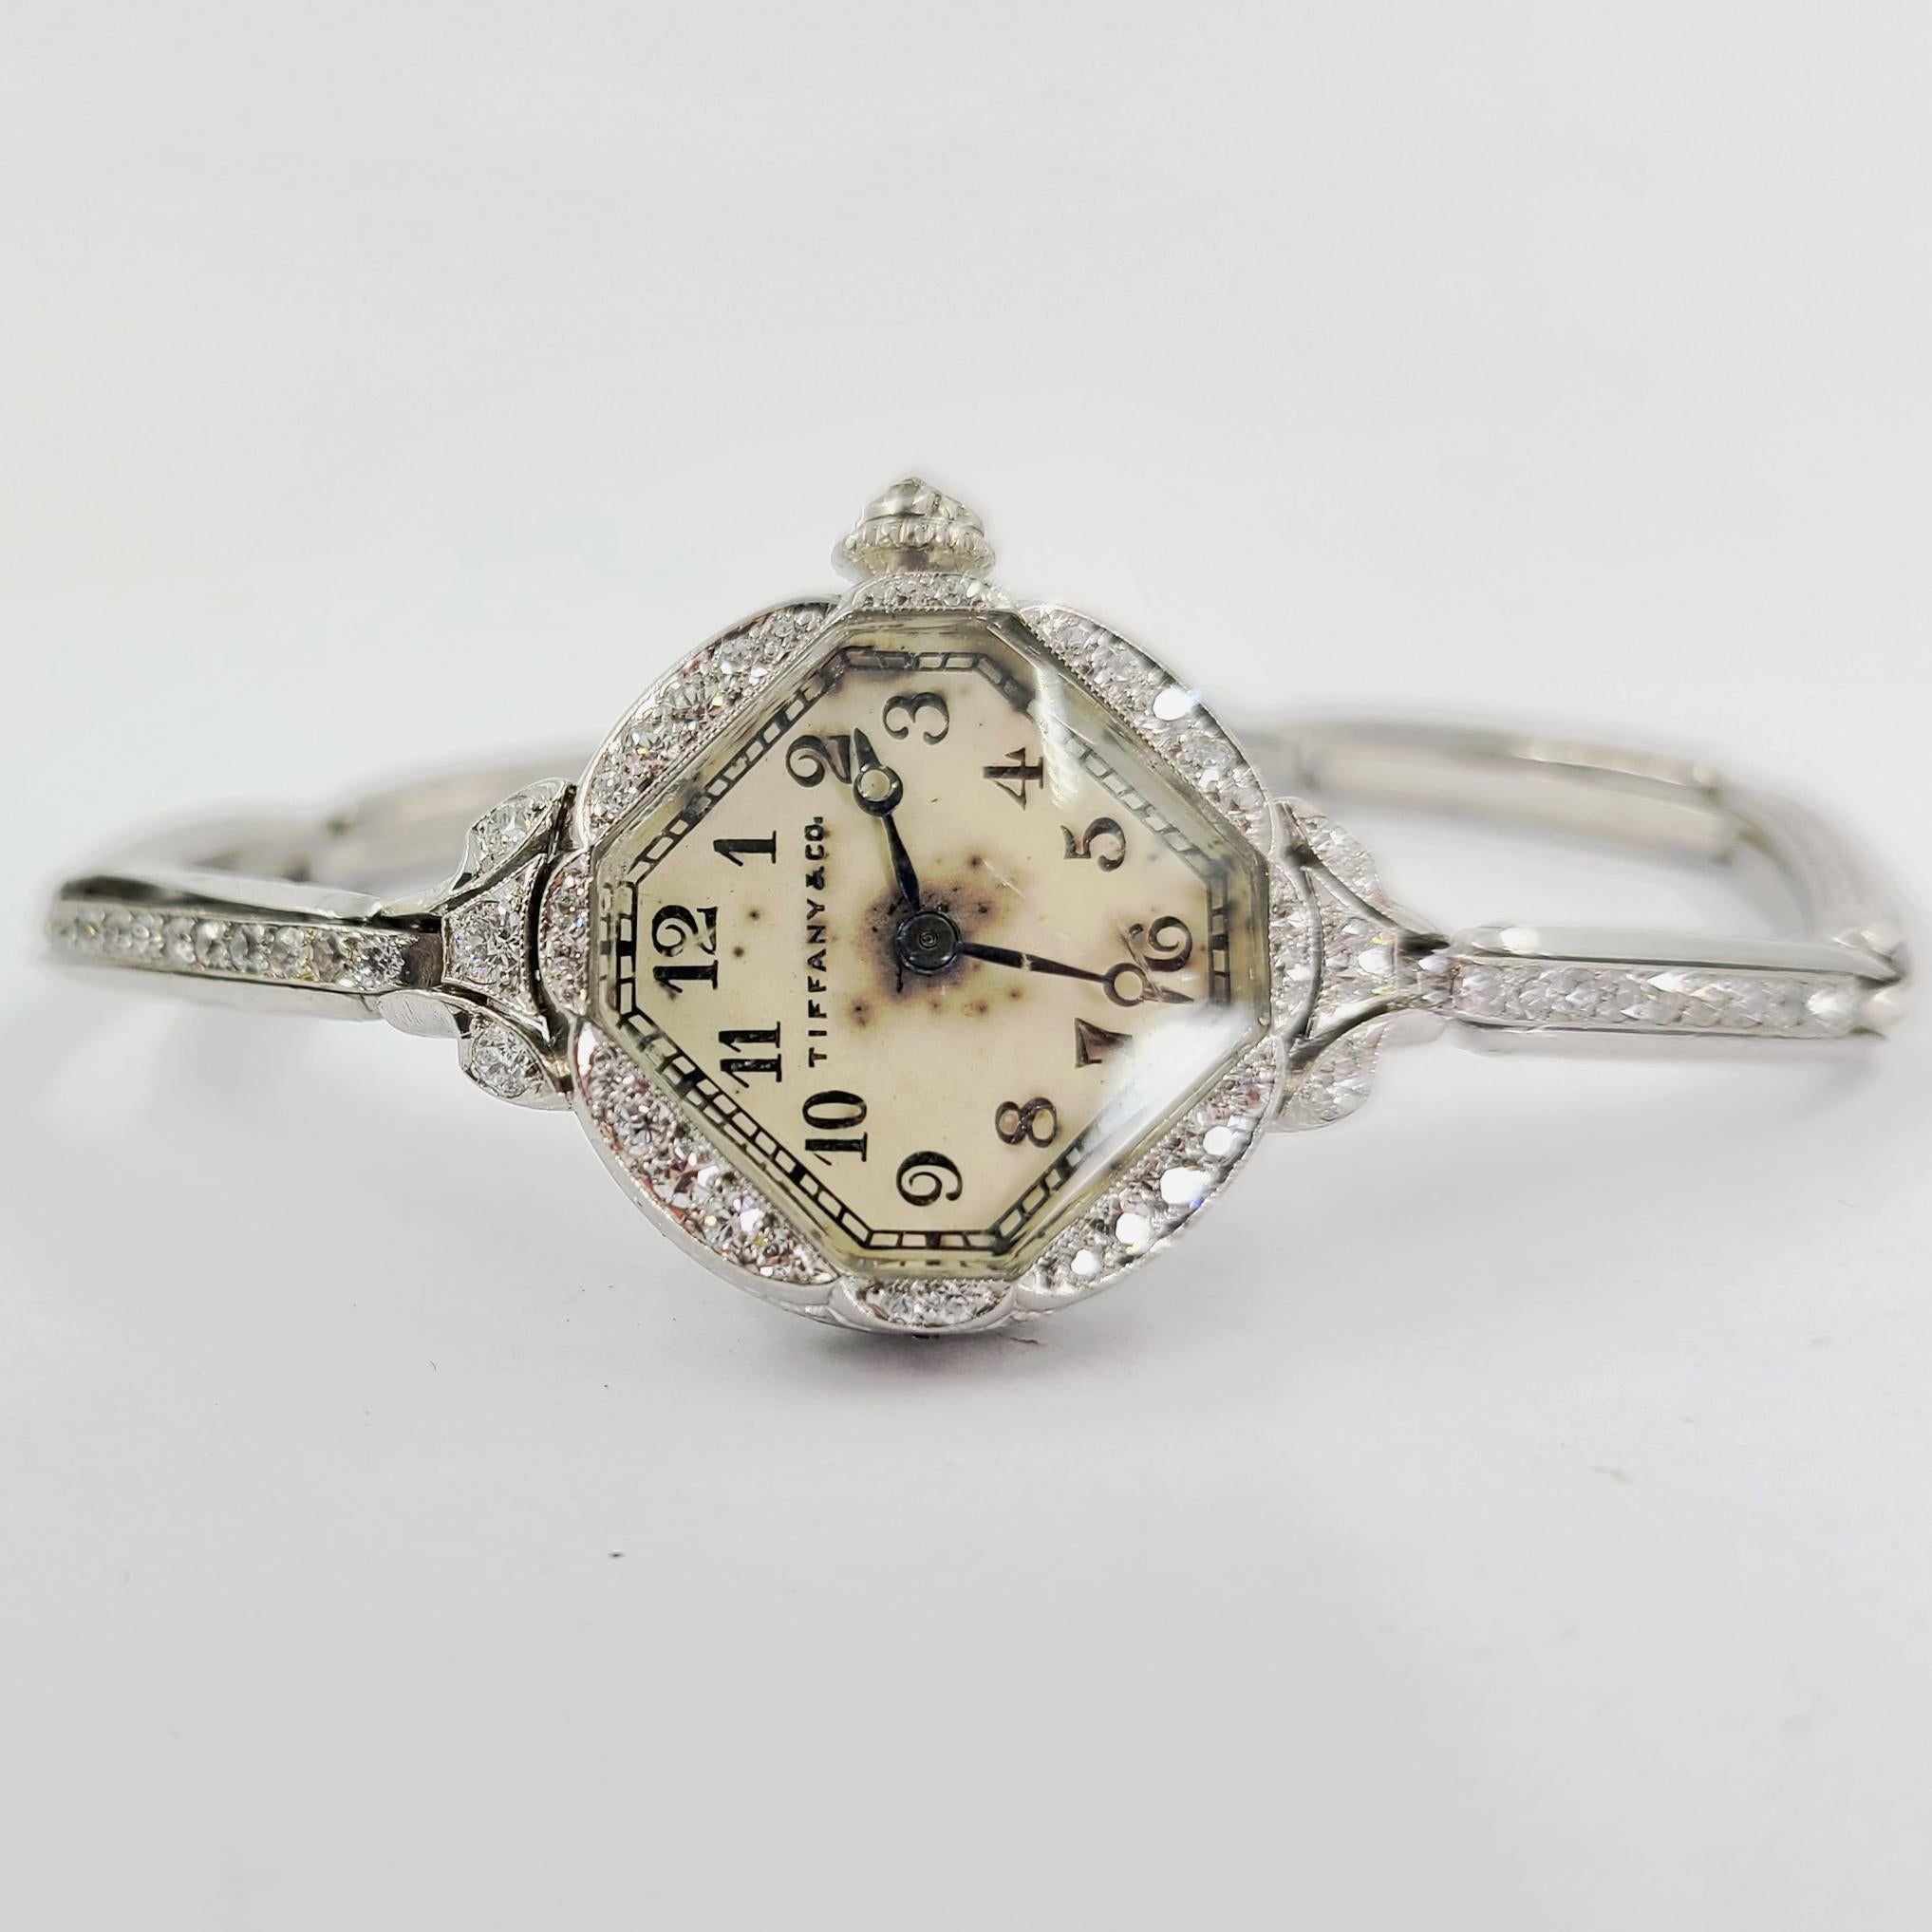 Antique Tiffany & Co Platinum Ladies Wristwatch Featuring A Working C.H. Meylan Manual Wind Movement. 50 Single Cut Diamonds of VS Clarity & G/H Color Total Approximately 0.50 Carat. Six Inch Length. Finished Weight Is 24.7 Grams. Discolored Dial.